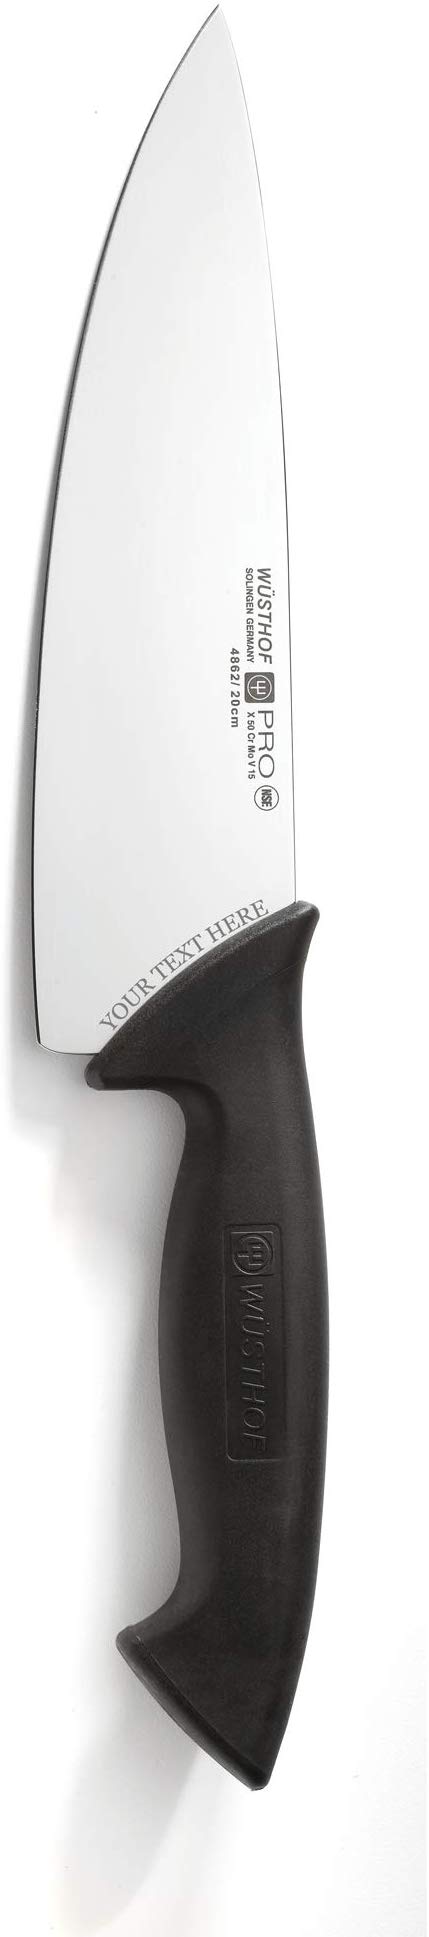 Wusthof Pro Cook's Knife - Personalized Engraving (Various Sizes)